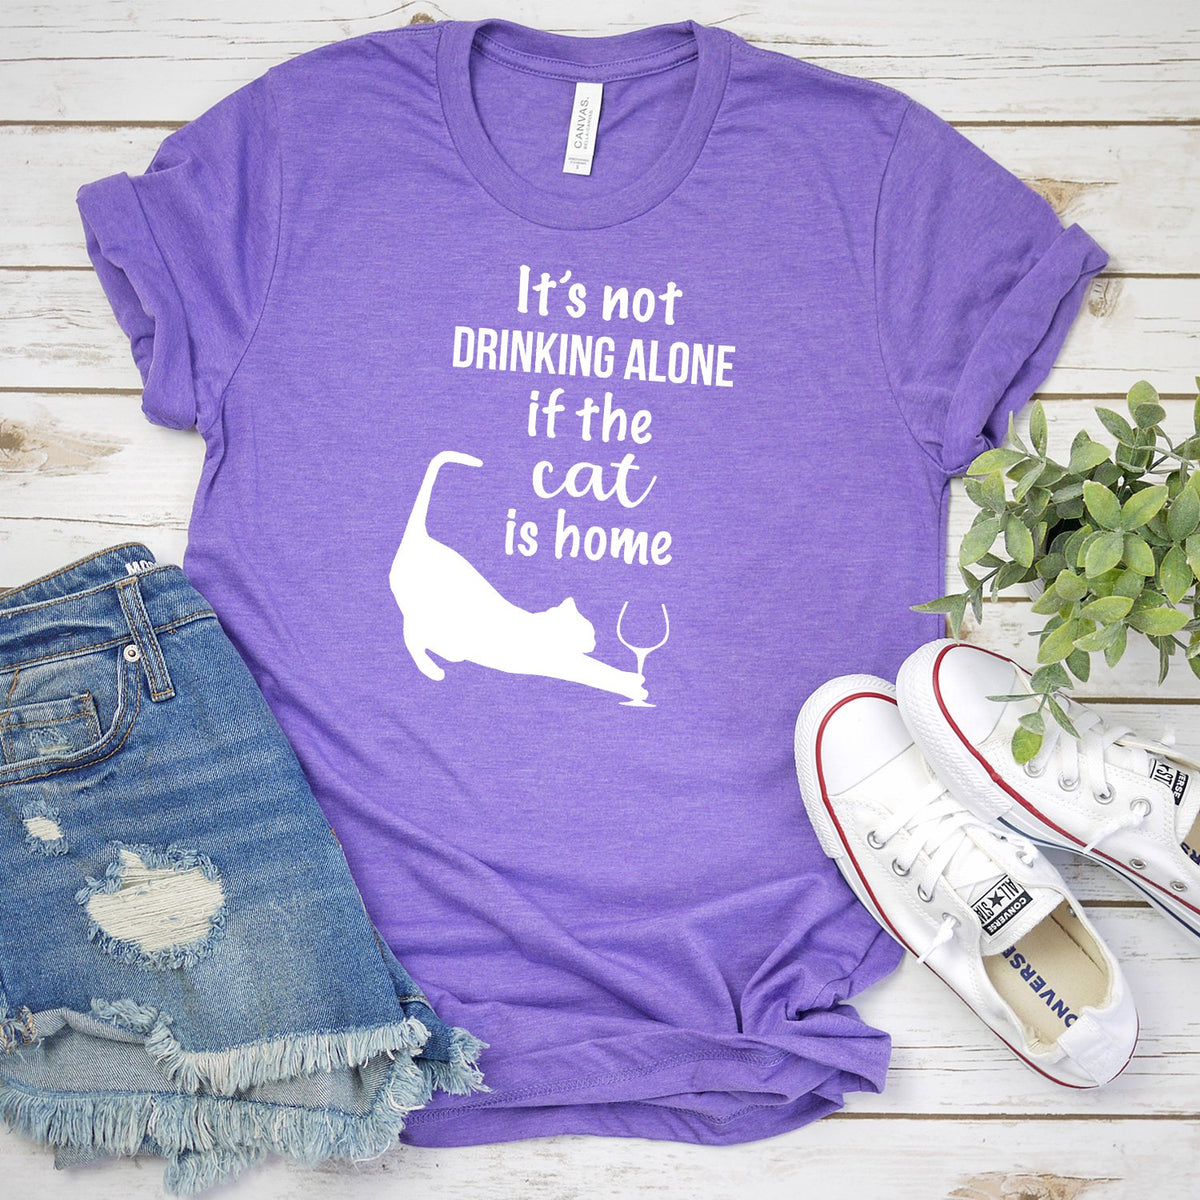 It&#39;s Not Drinking Alone If the Cat is Home - Short Sleeve Tee Shirt